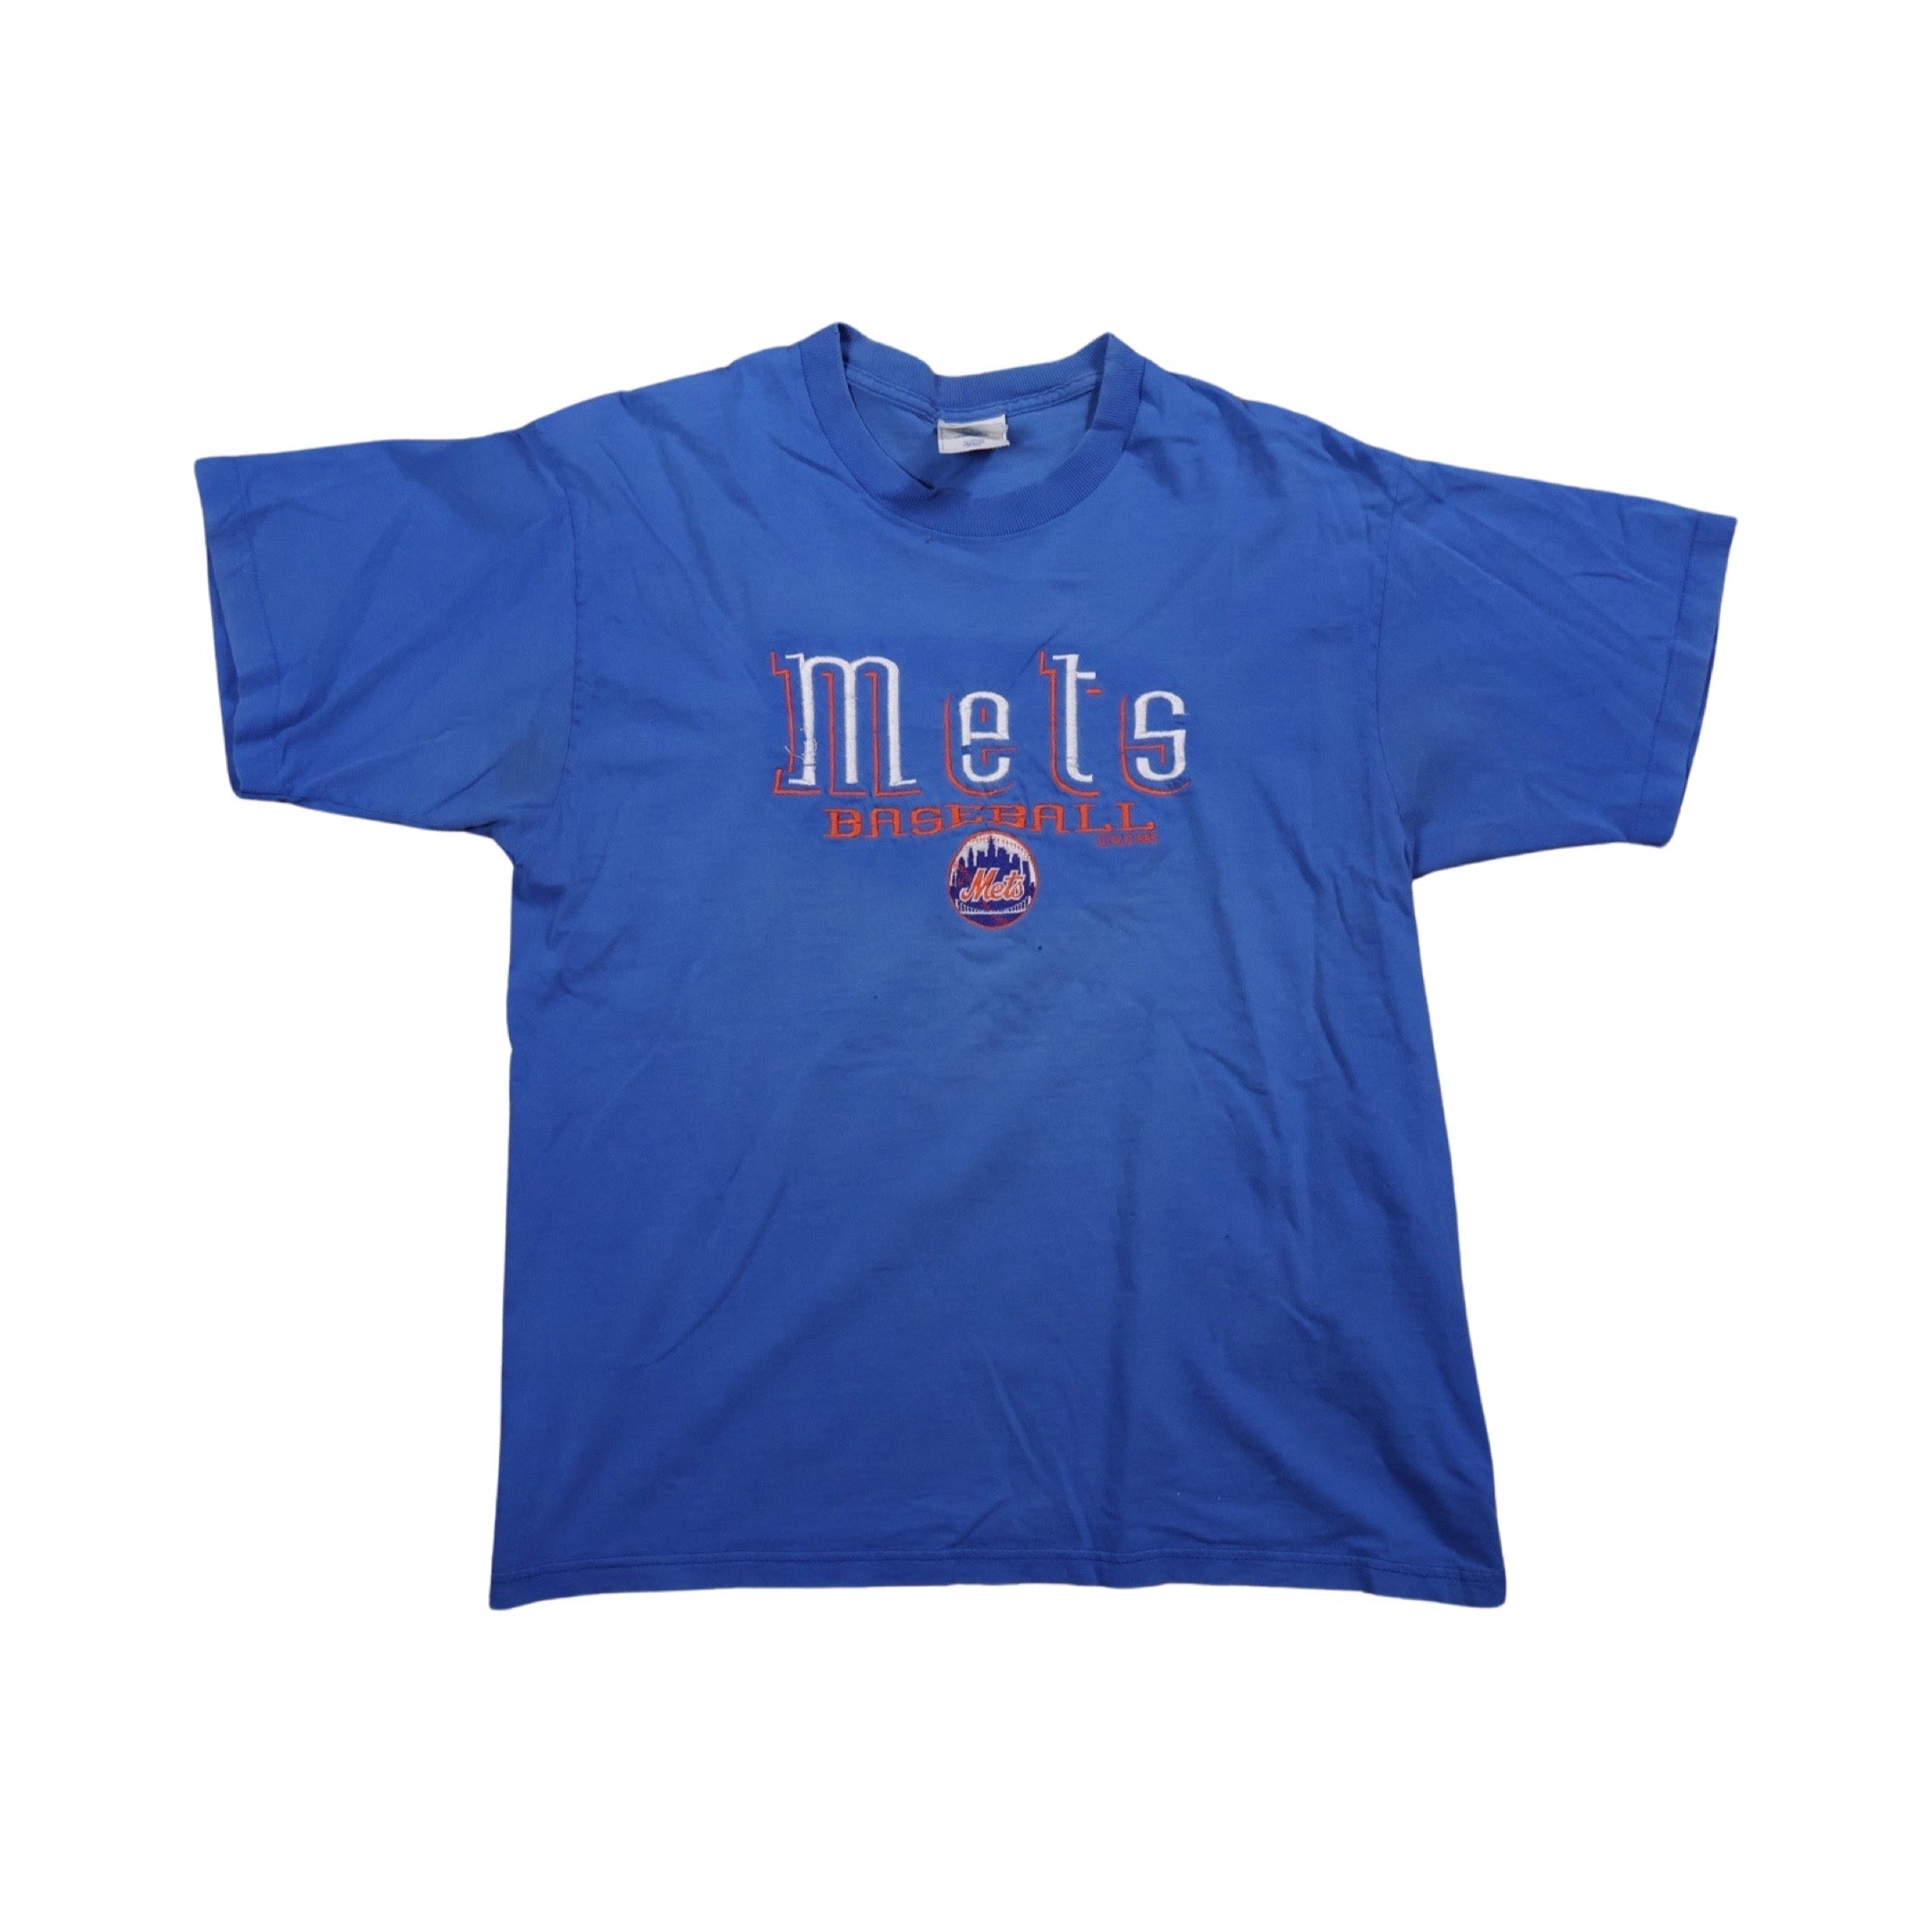 New York Mets 1998 T-Shirt (Large)